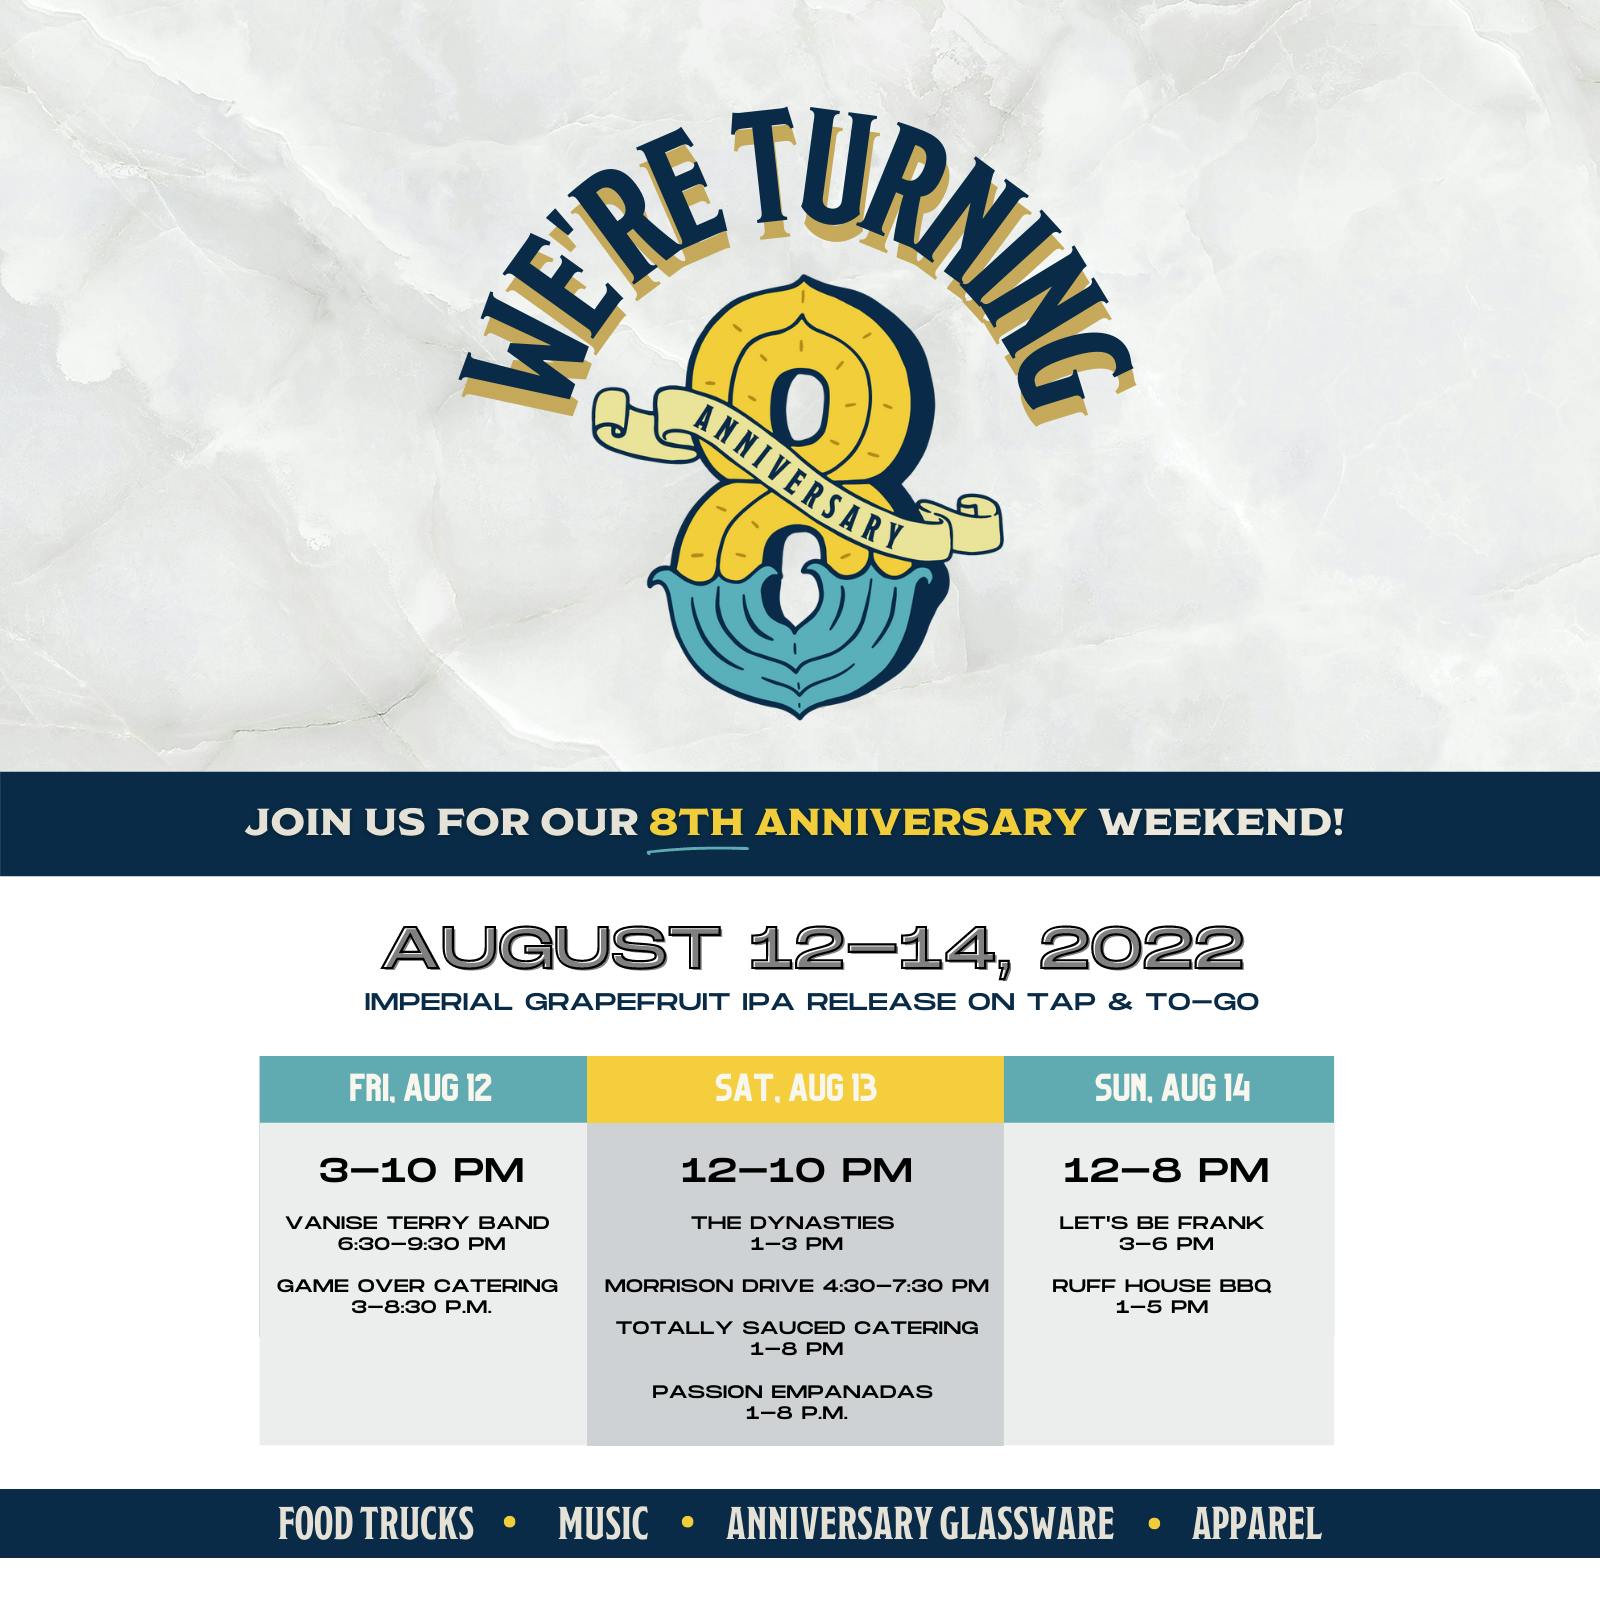 8th Anniversary Weekend at Poseidon Brewing Co